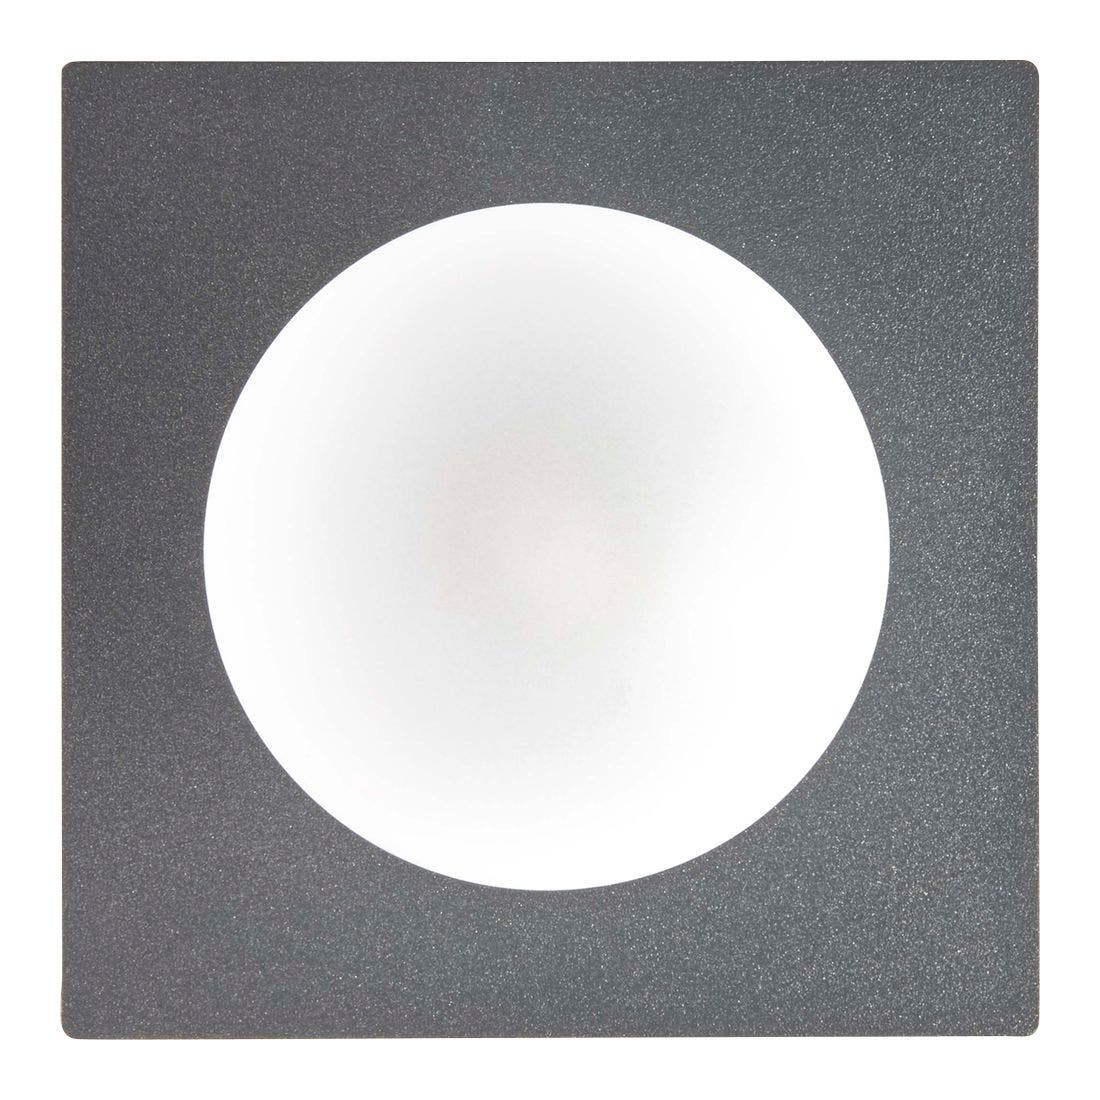 25021714-clement-lighting-wall-lamp-01